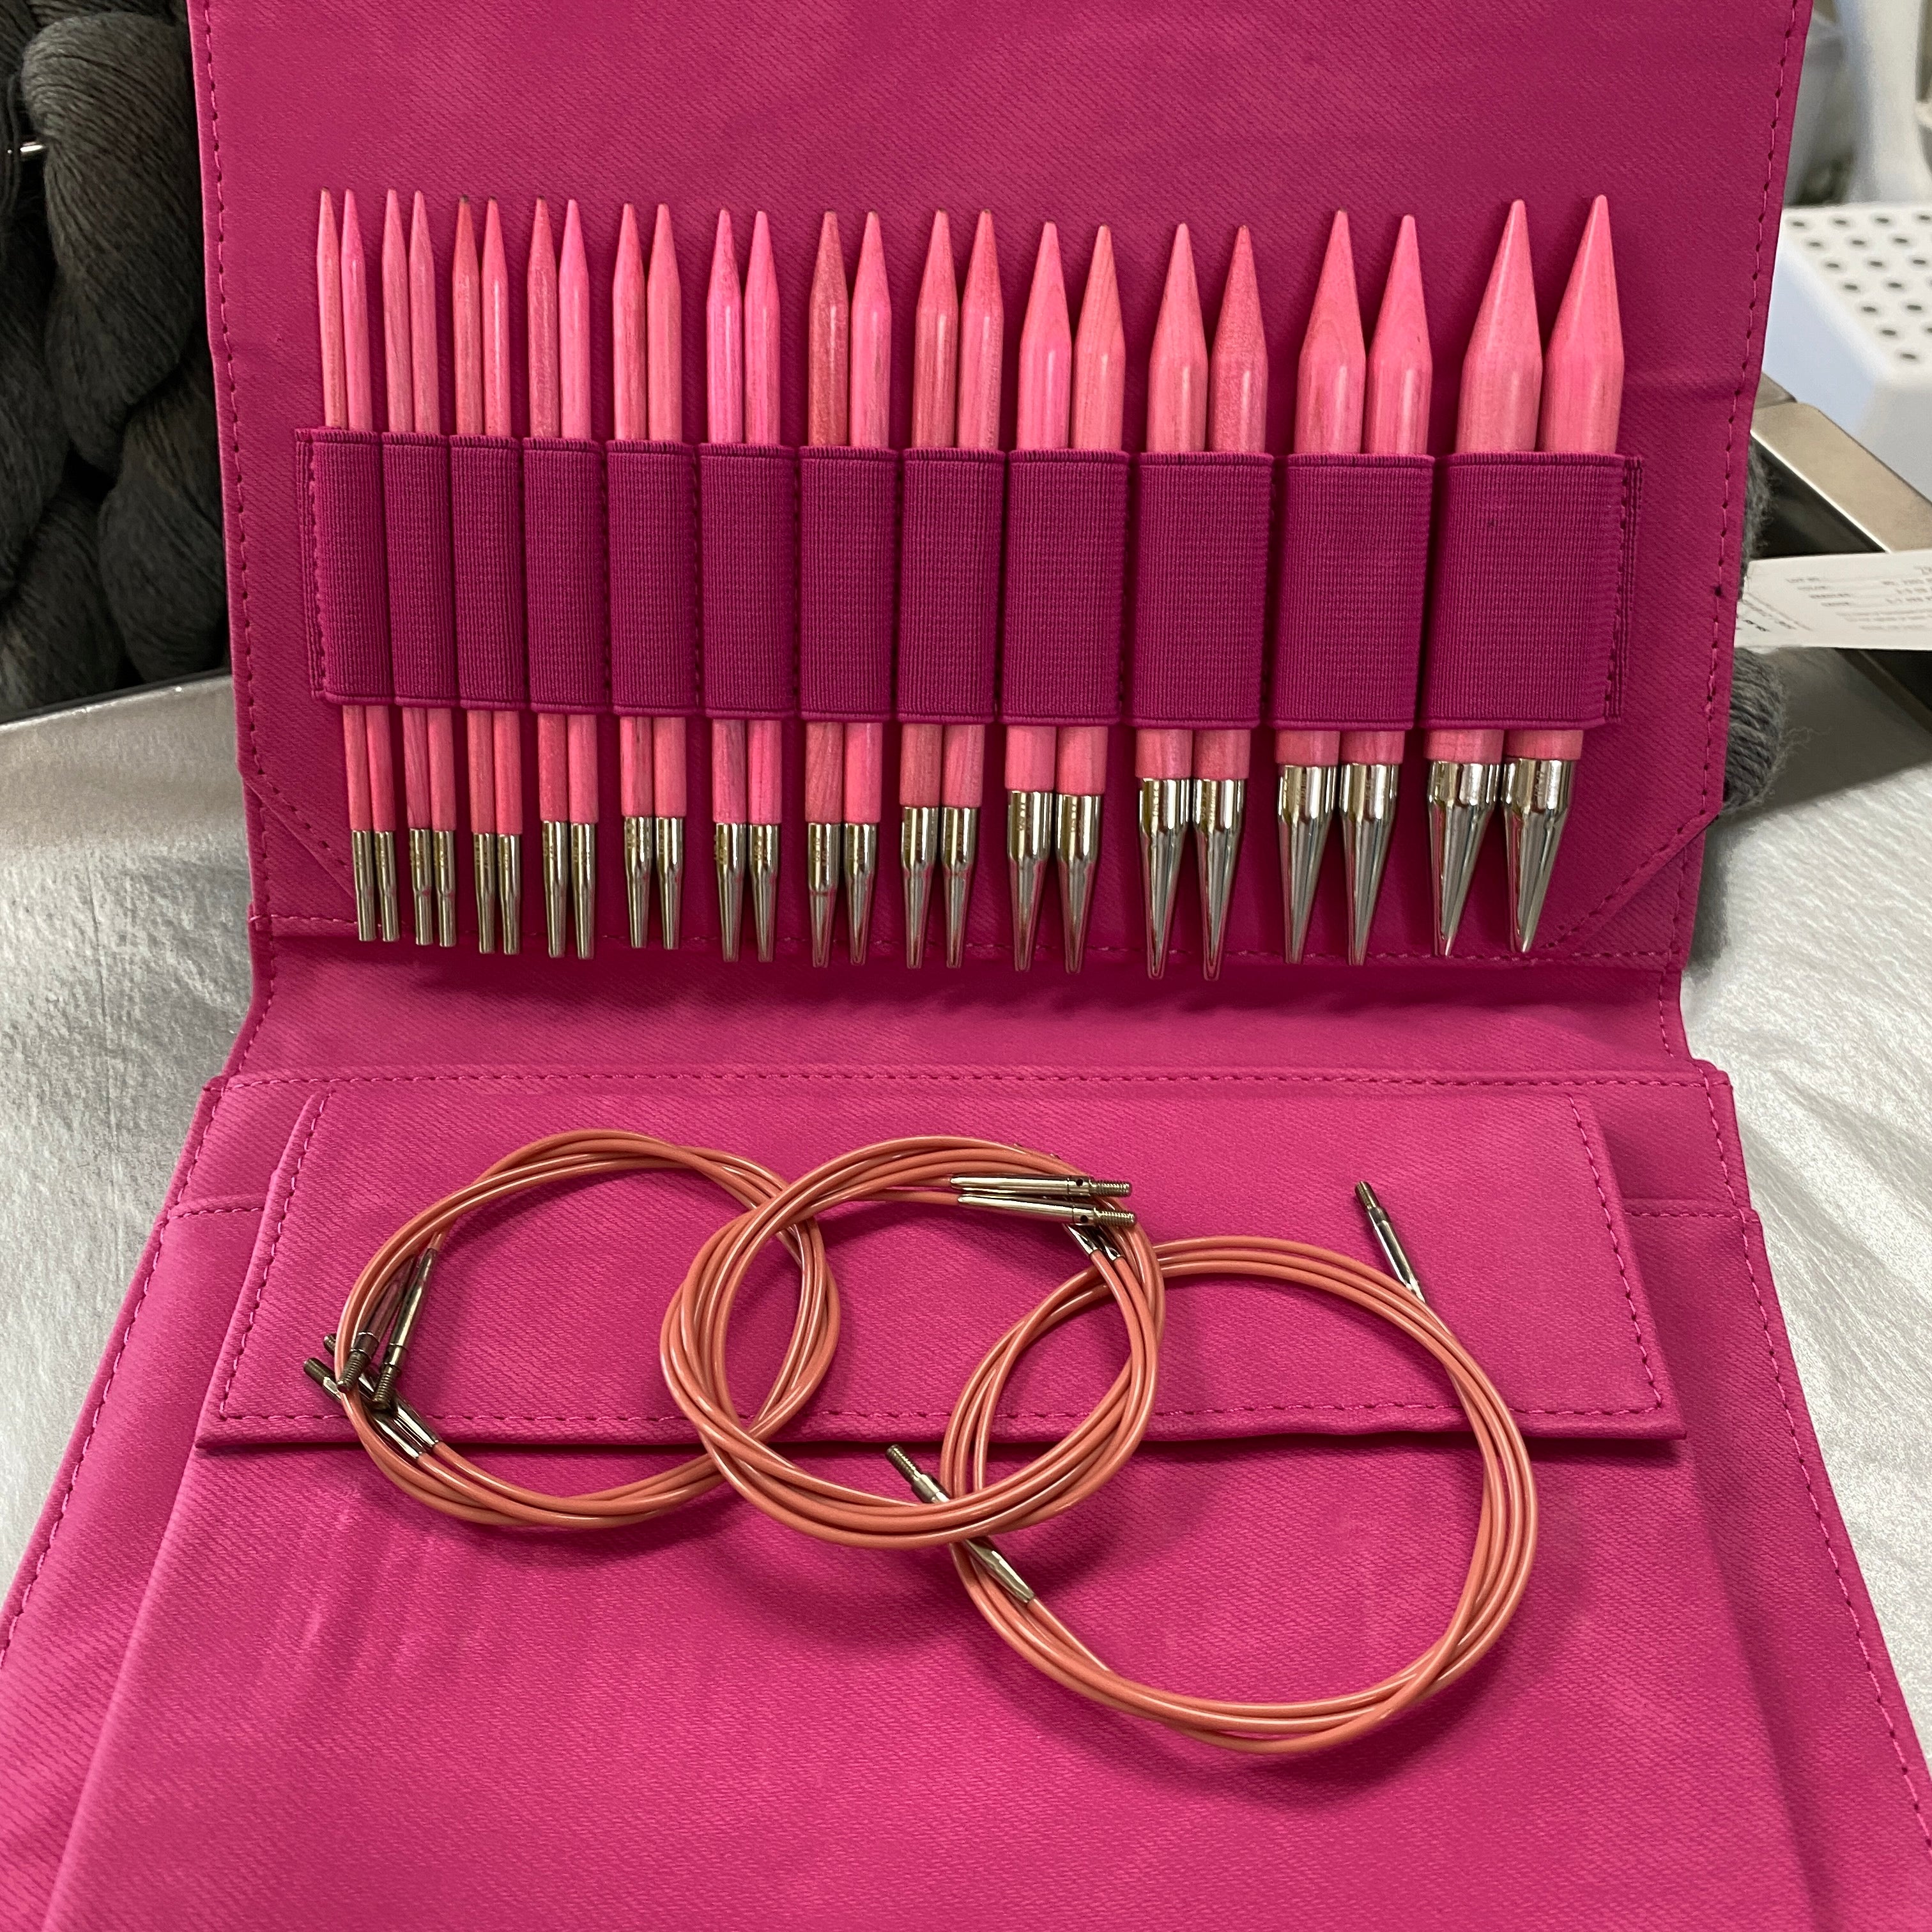 Blush Lykke 3.5 and 5 Interchangeable Circular Sets — The Nifty Knitter